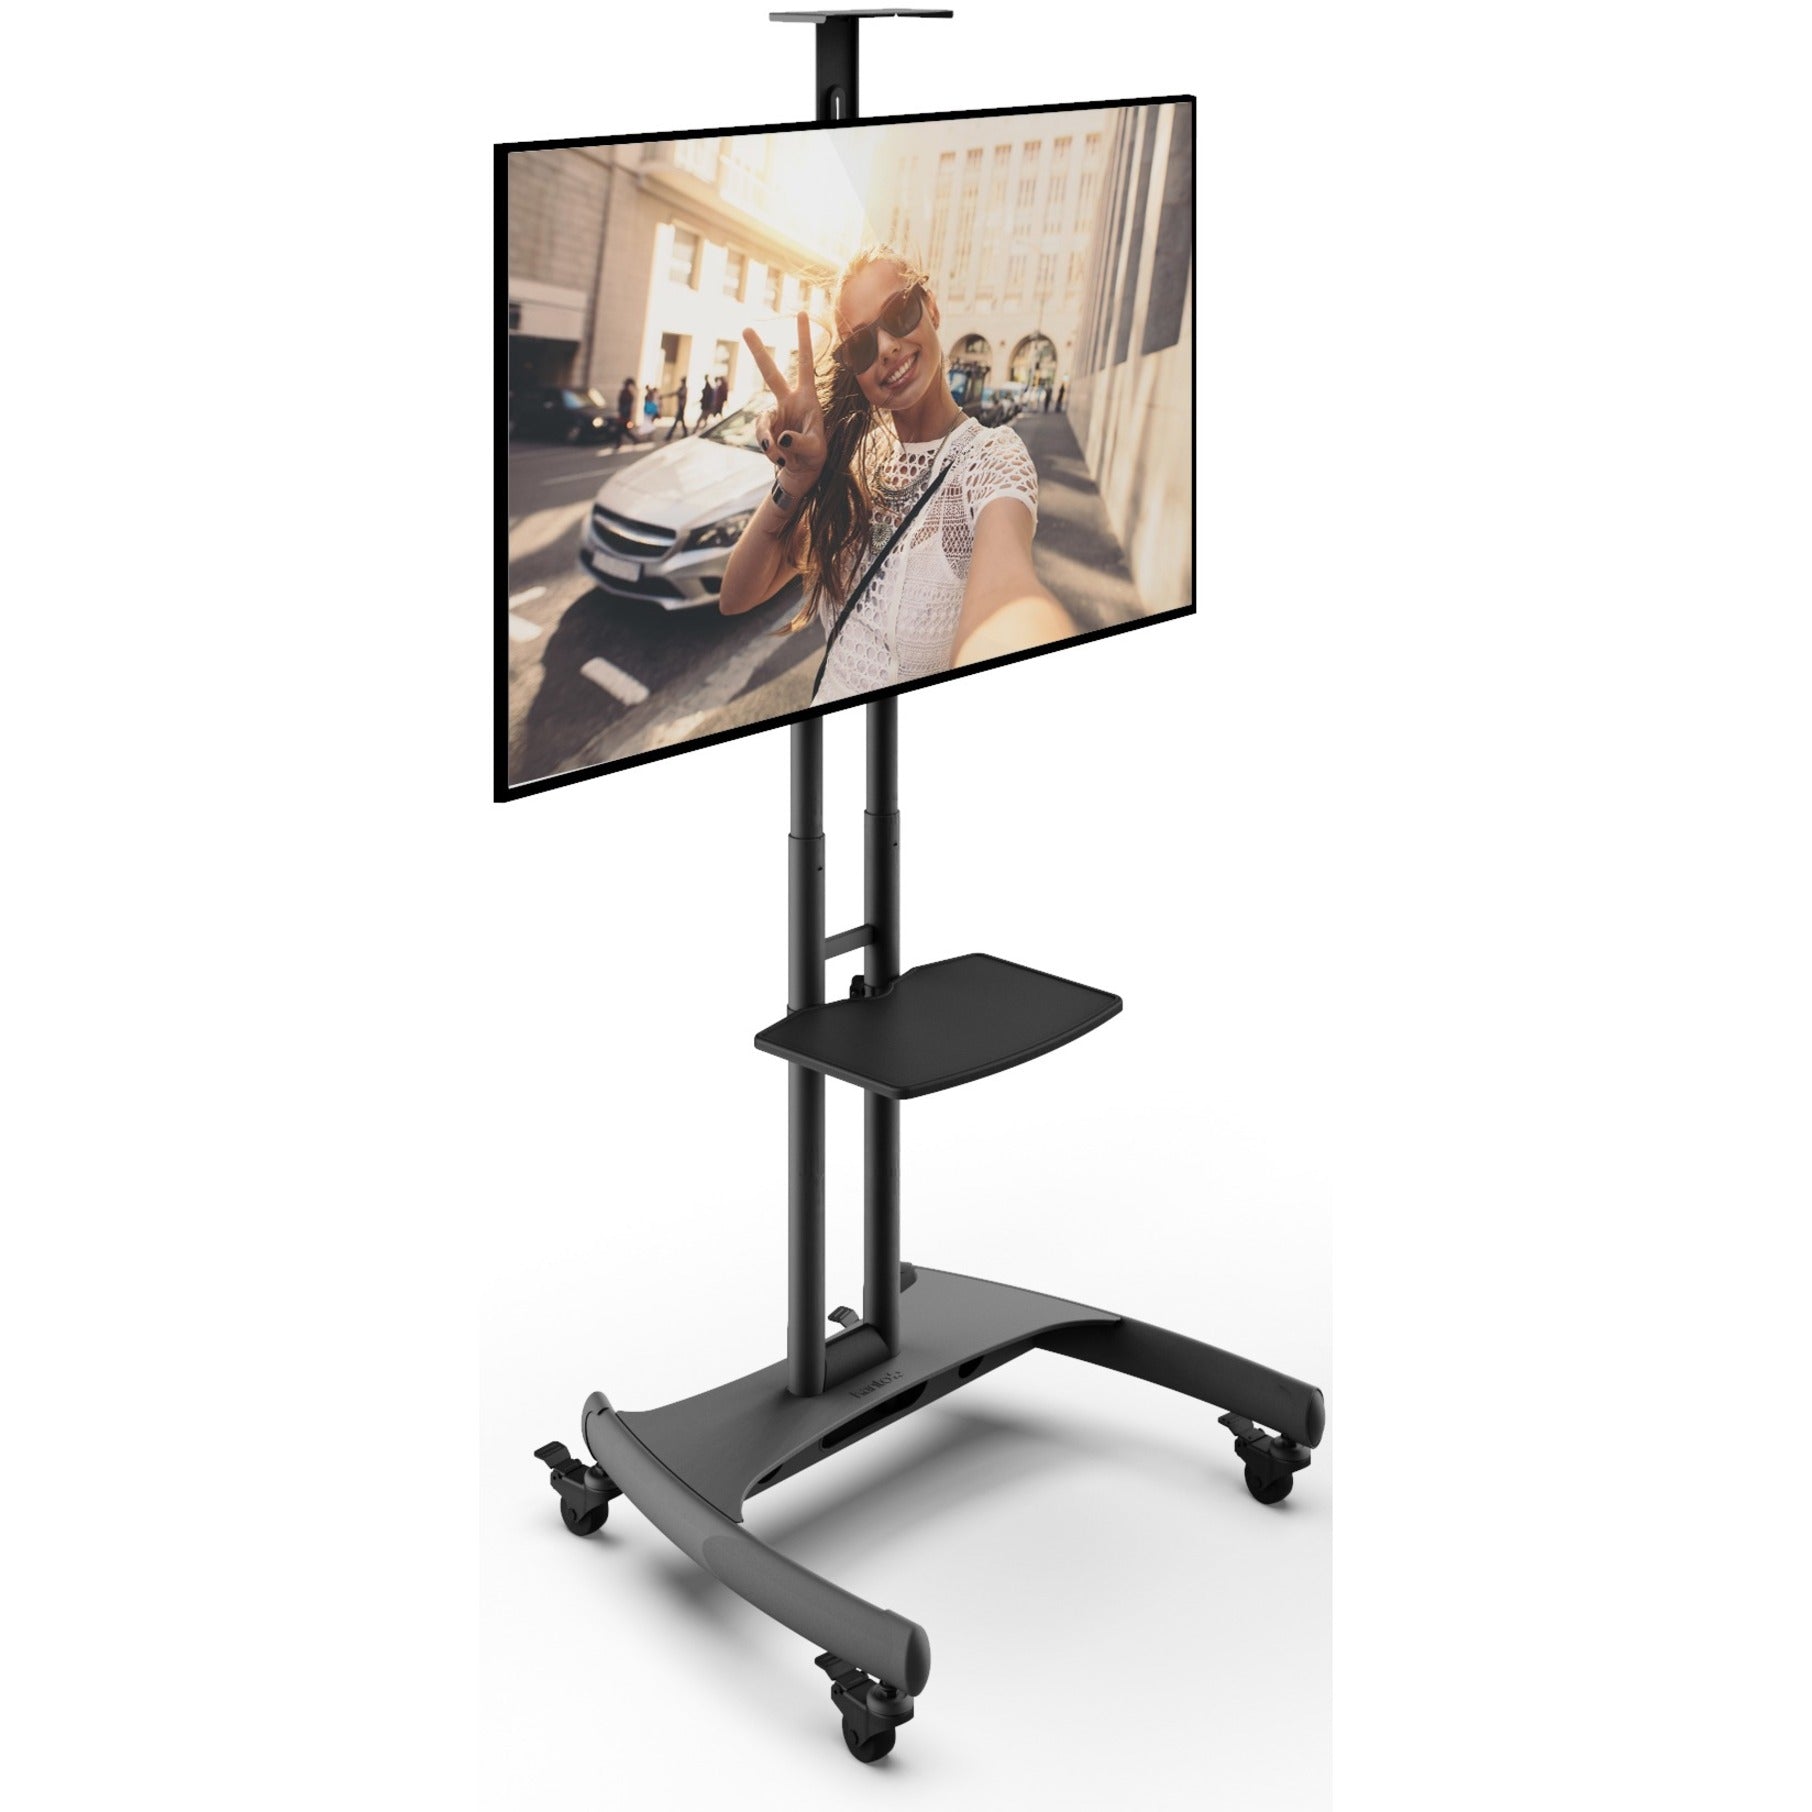 Kanto MTM65PL Mobile TV Mount with Adjustable Shelf for 37-65" TVs, Durable and Portable